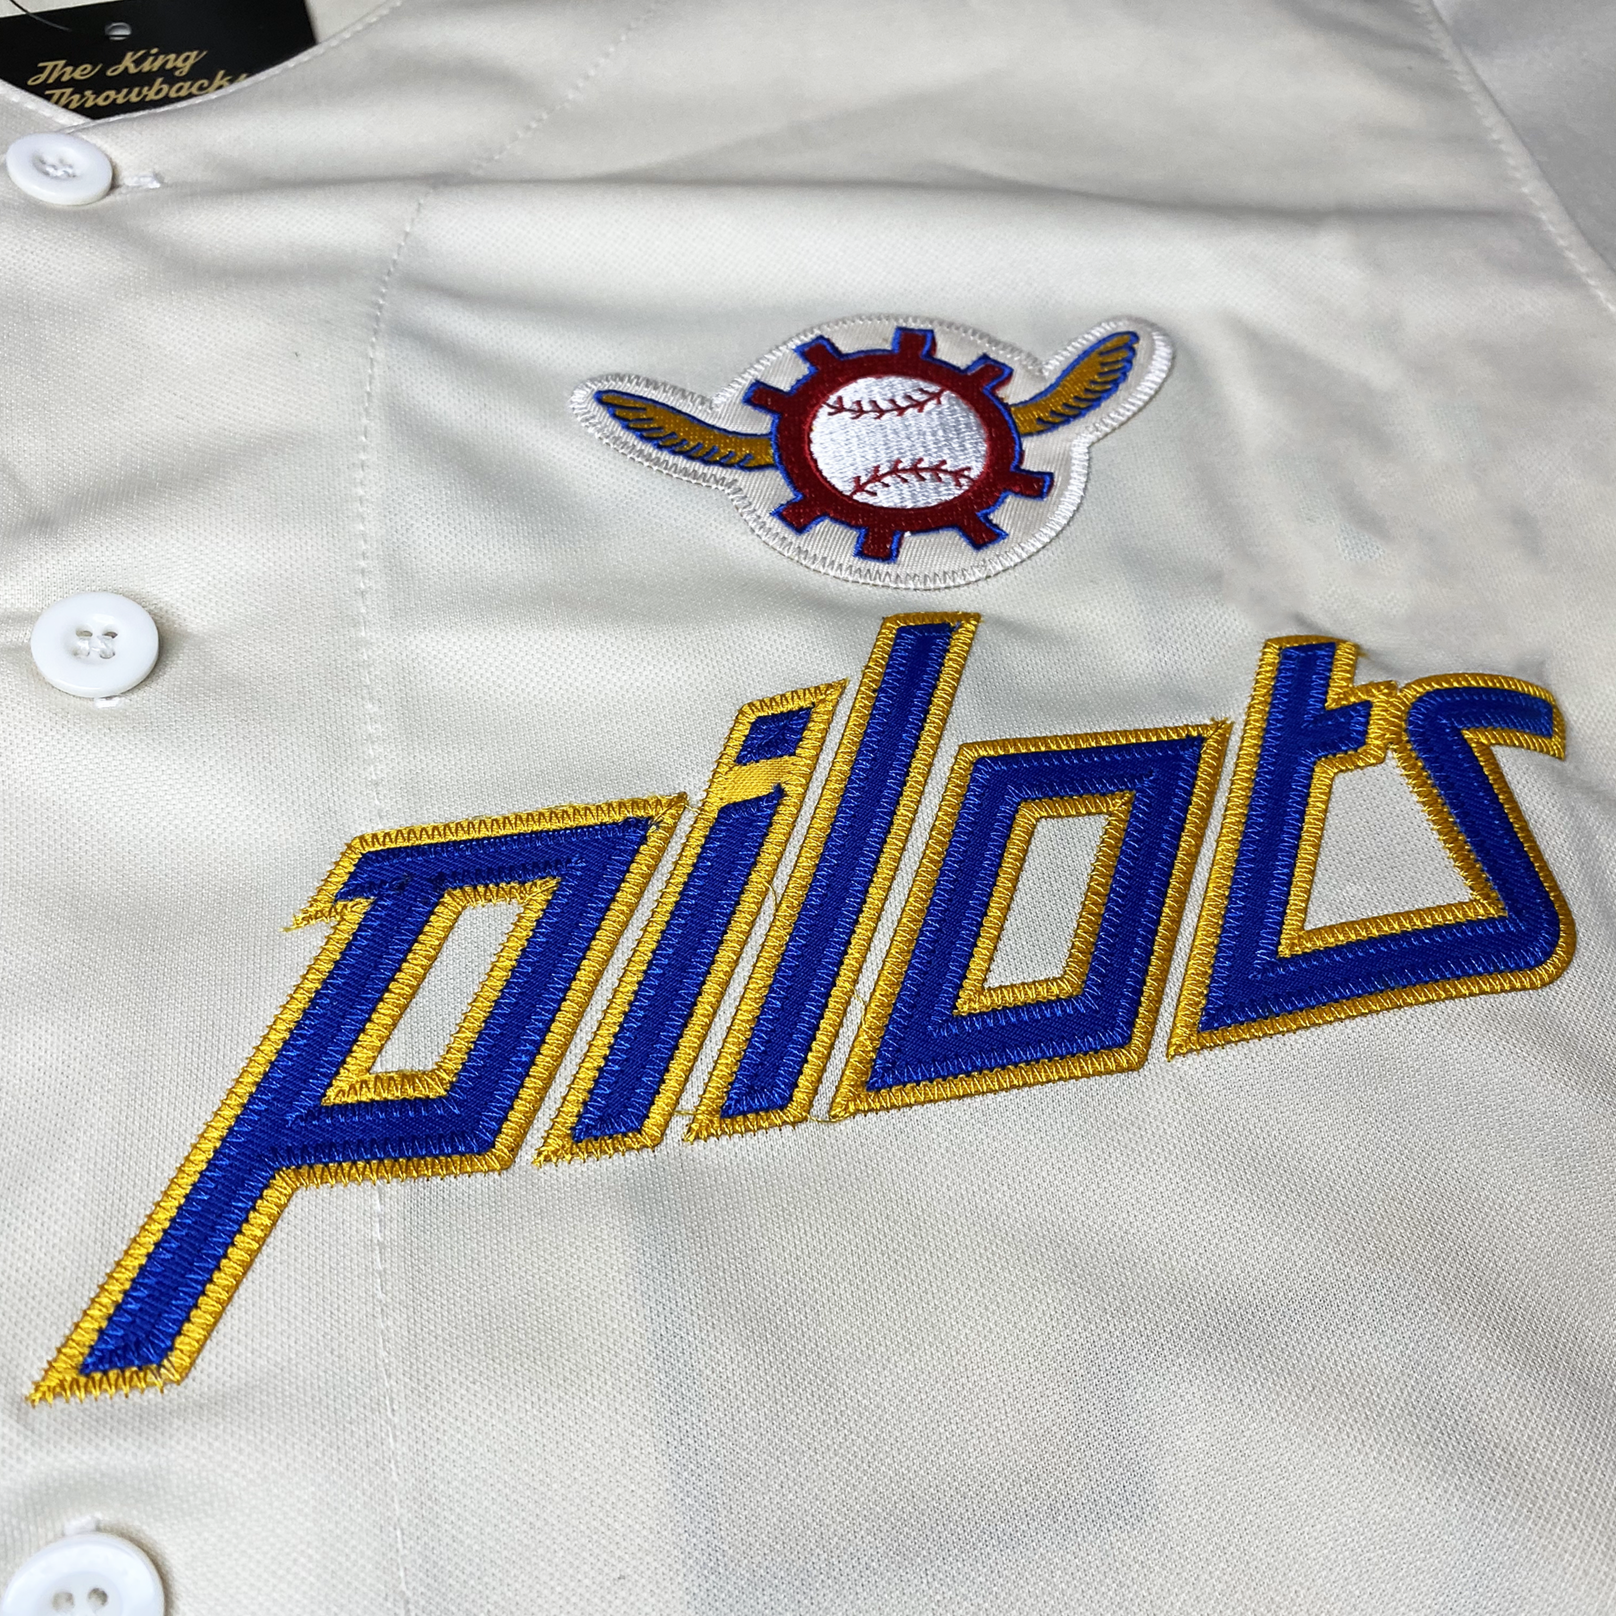 The Seattle Pilots throwback jerseys worn by the Seattle Mariners for  News Photo - Getty Images